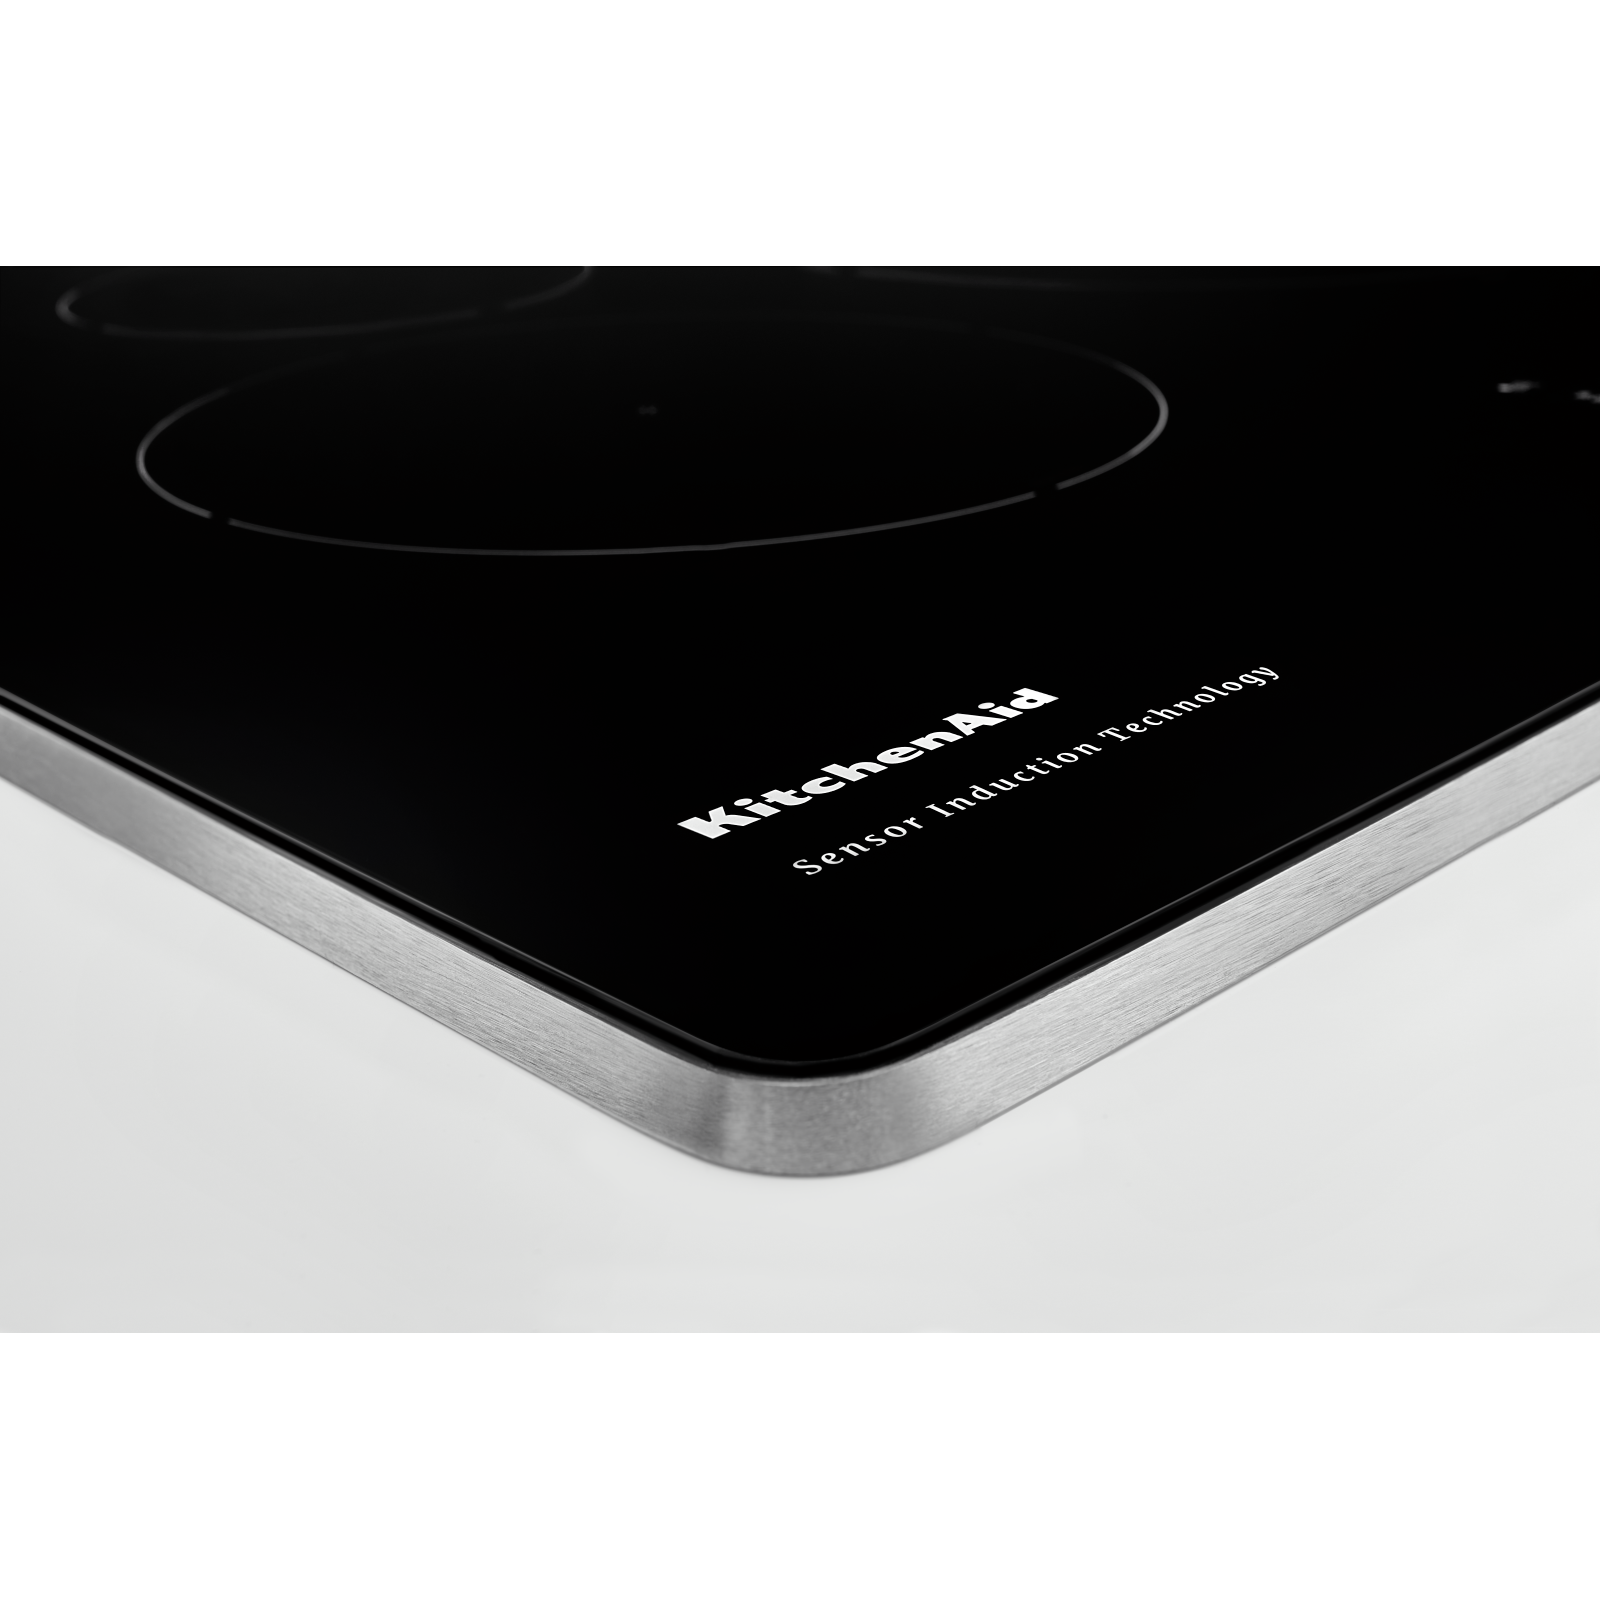 KitchenAid - 36.6875 inch wide Induction Cooktop in Stainless - KCIG556JSS